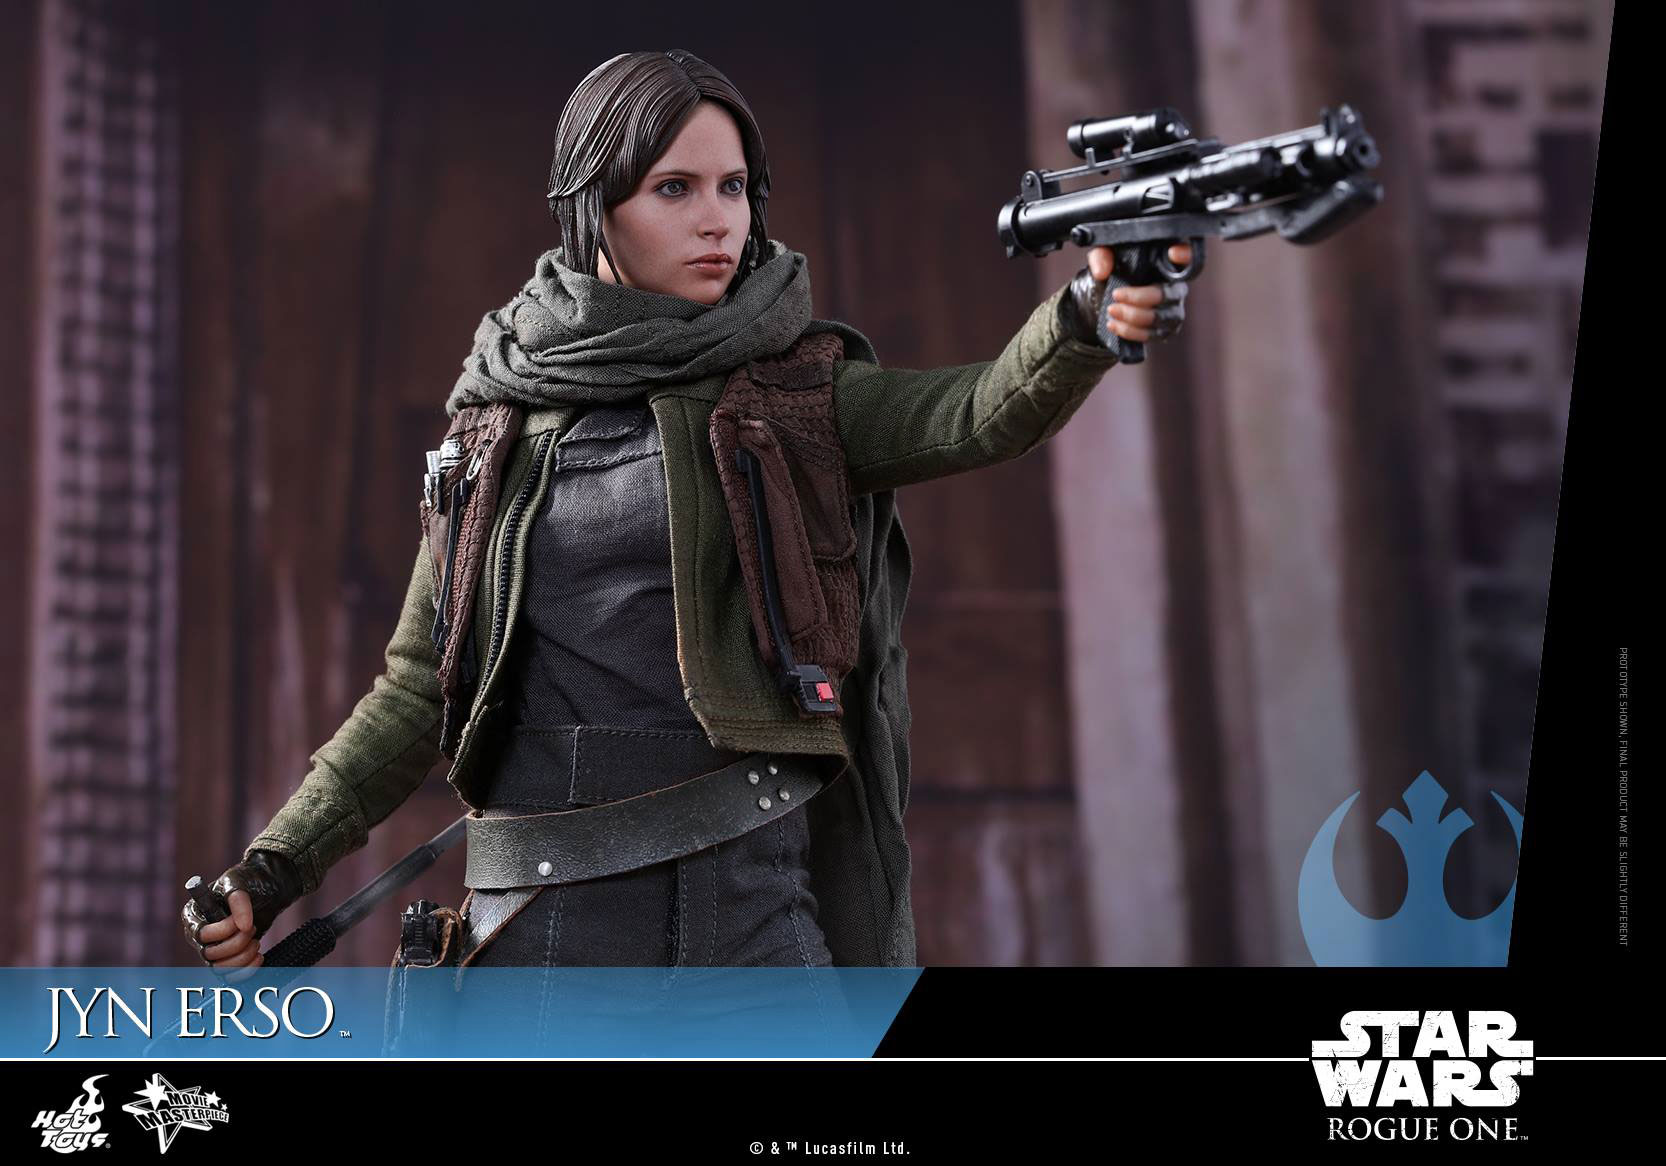 hot-toys-star-wars-rogue-one-jyn-erso-figure-1